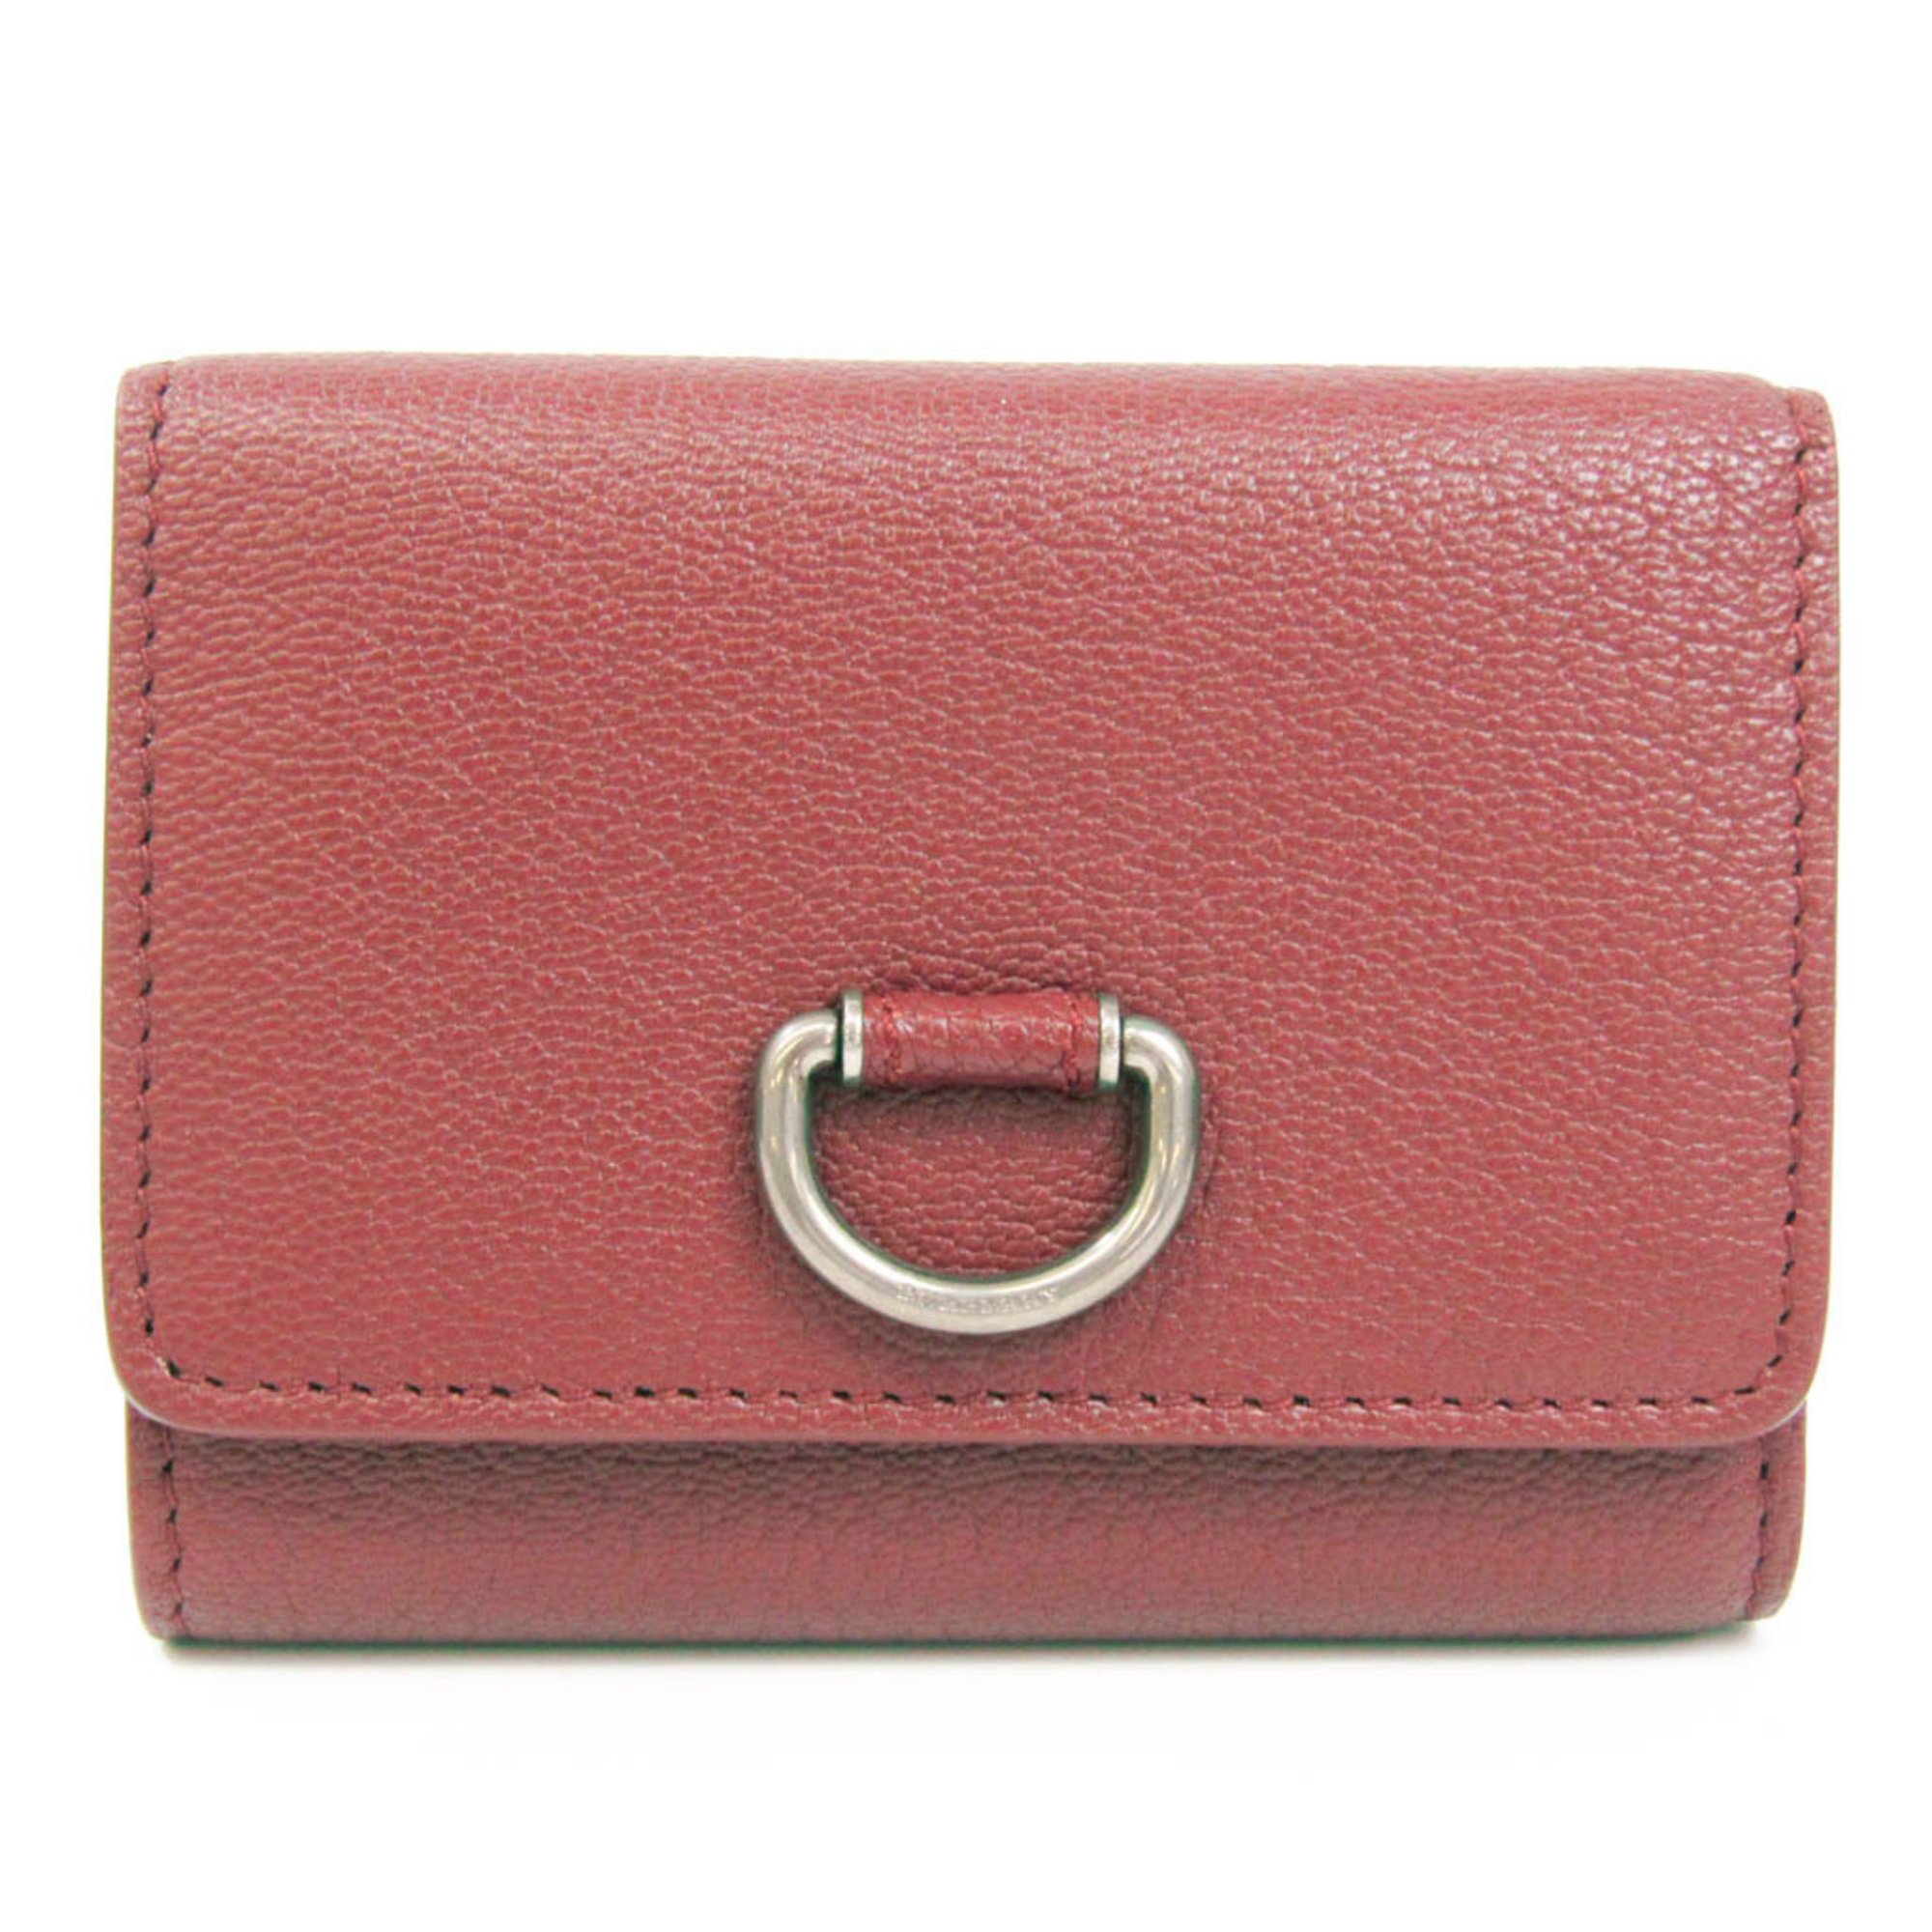 Burberry 8005356 Women,Men Leather Bill Wallet (tri-fold) Red Color